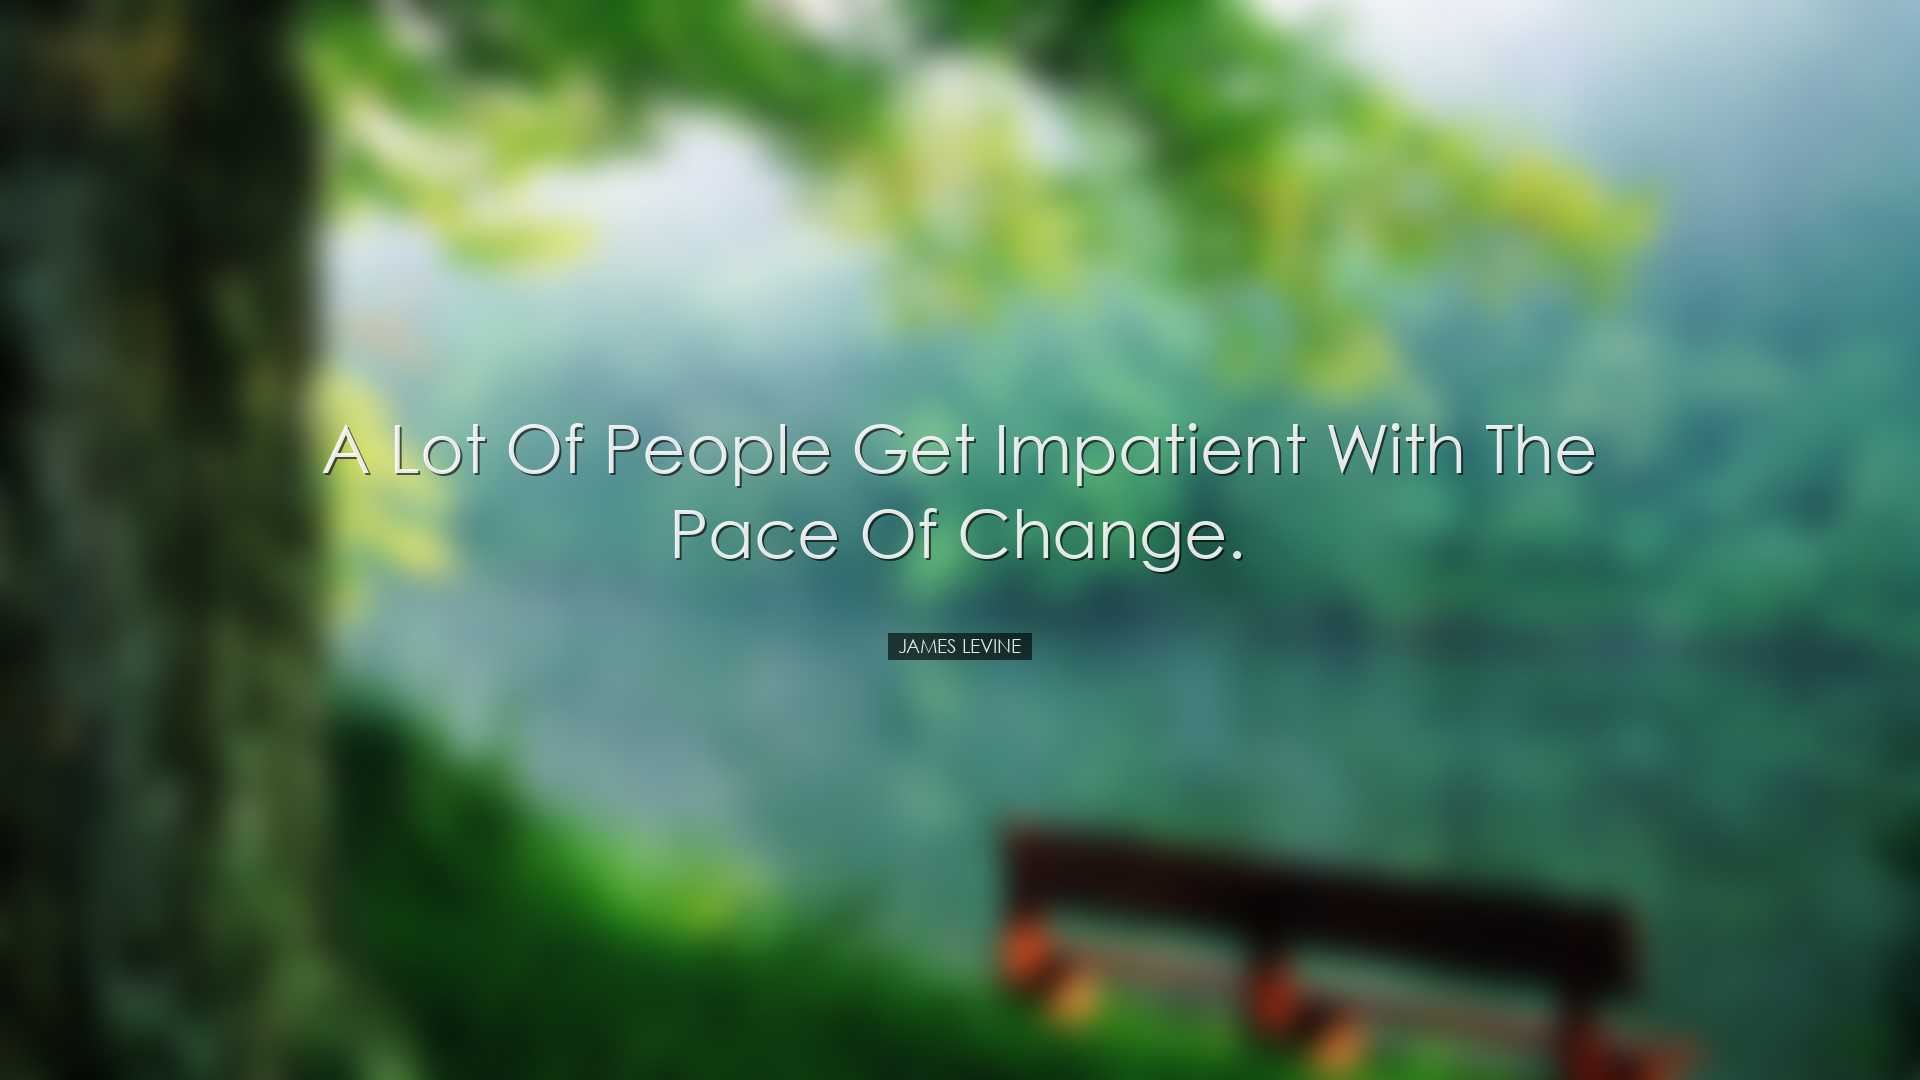 A lot of people get impatient with the pace of change. - James Lev